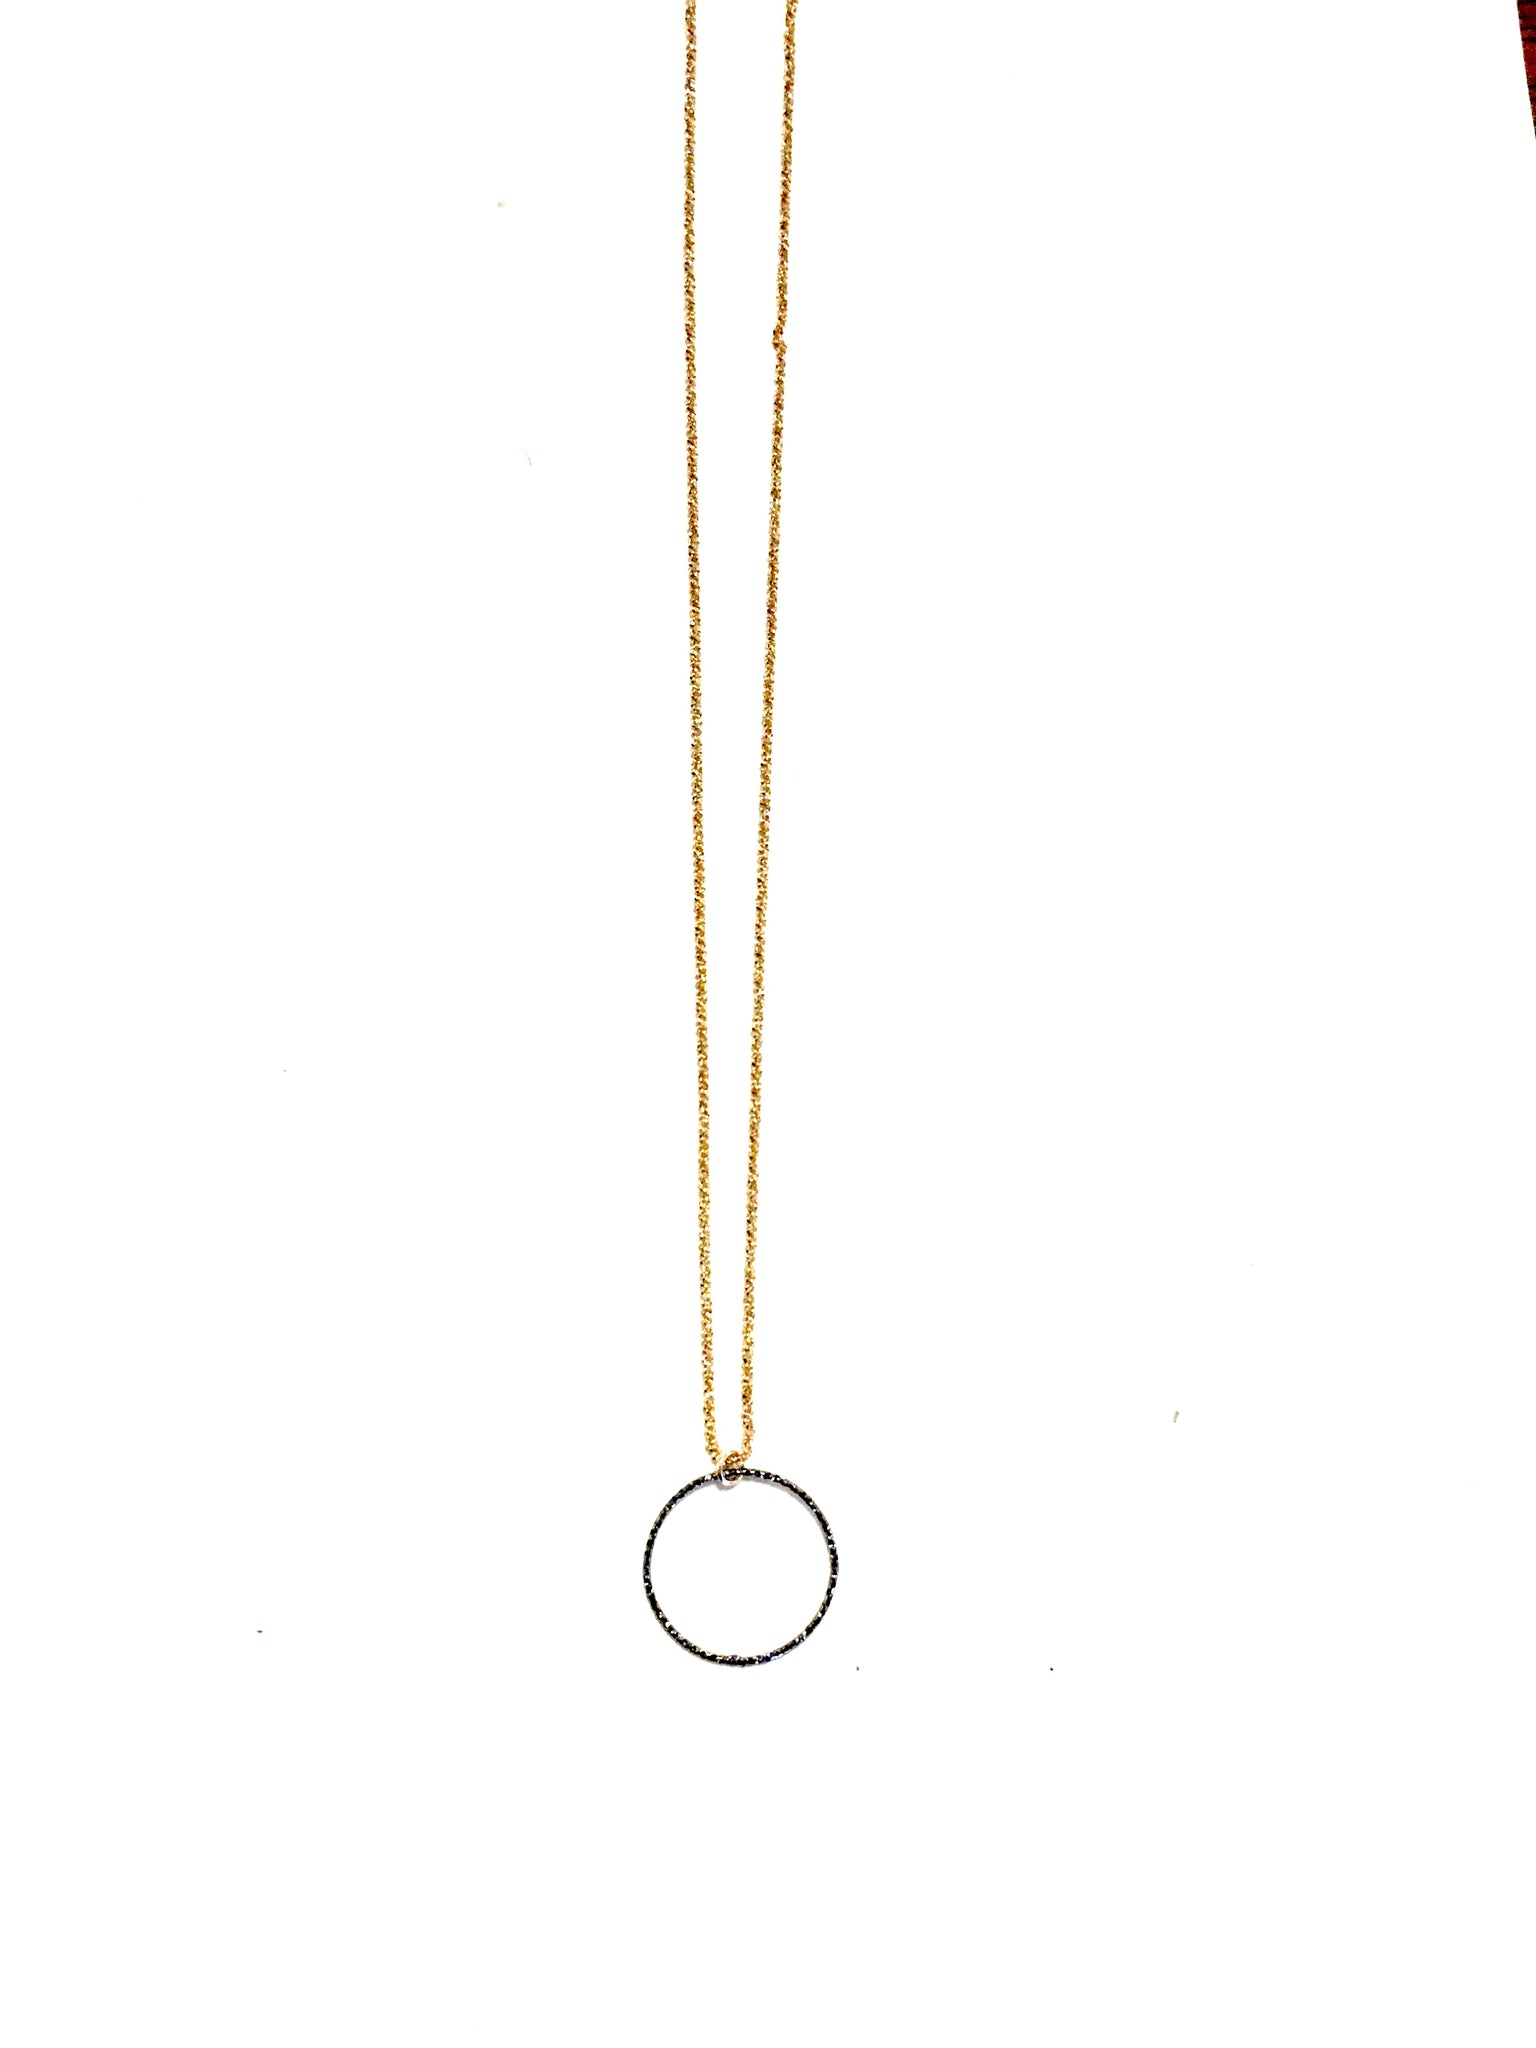 Margo-L  - sterling silver necklace with laser cut circle